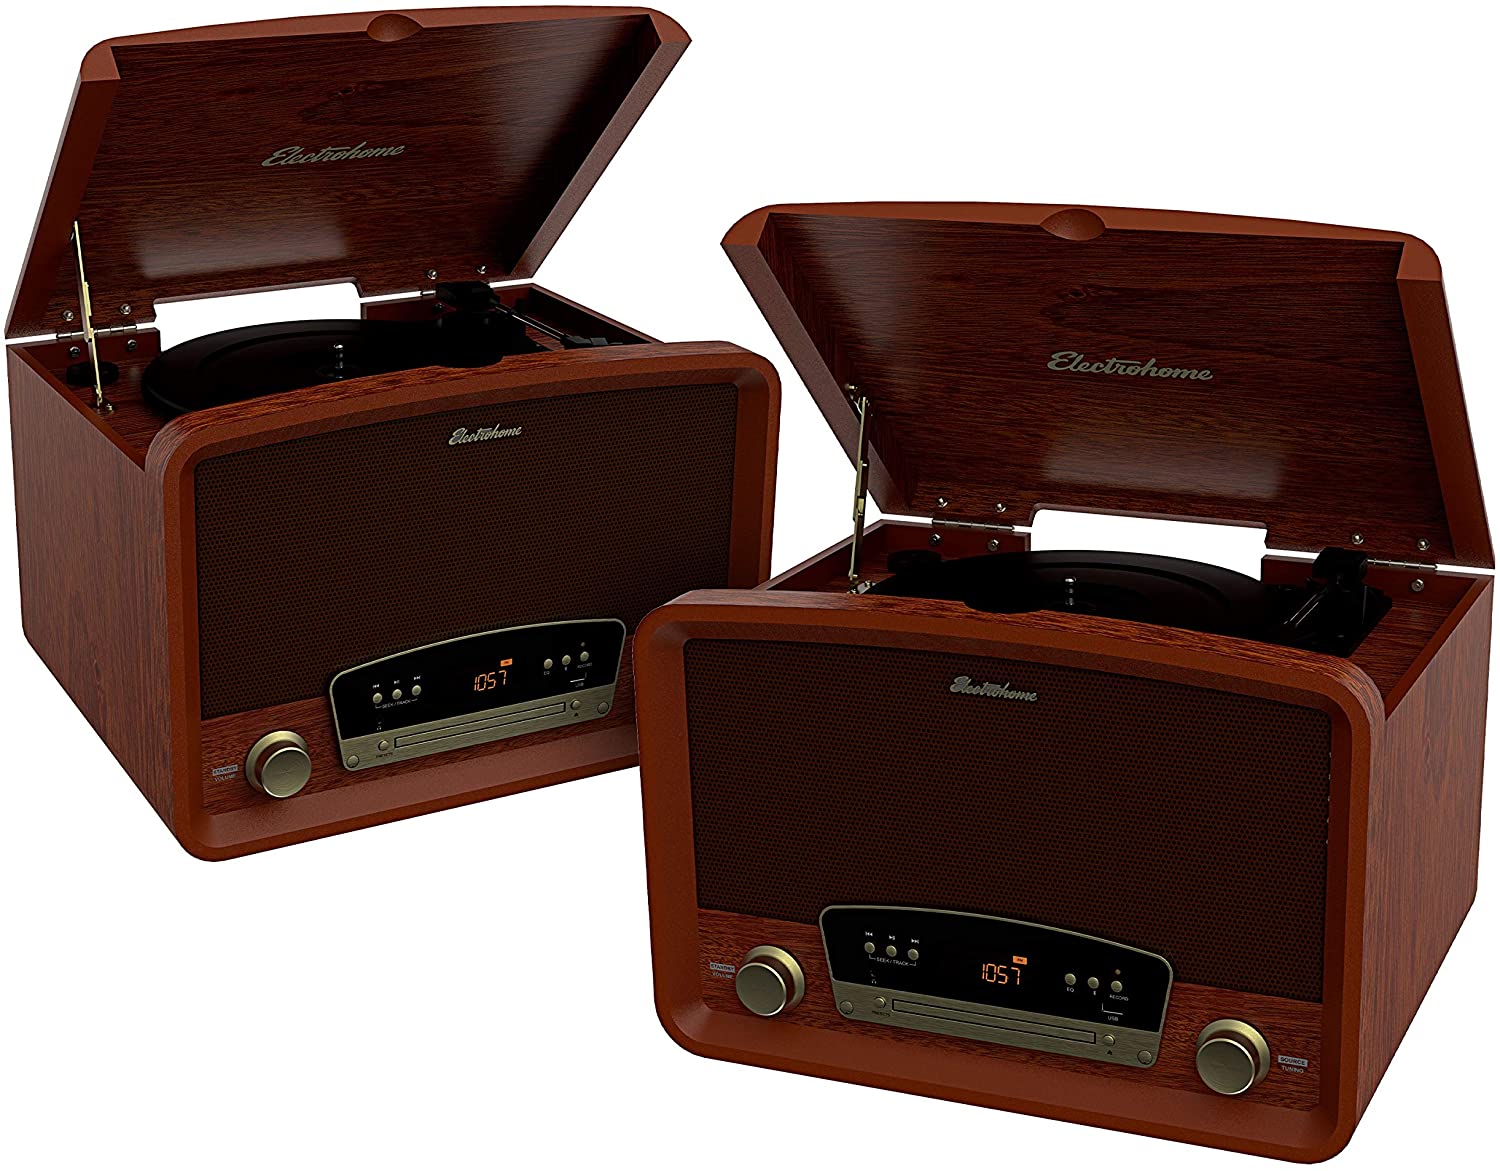 Electrohome Vinyl Record Player - 2 PACK - image 1 of 8